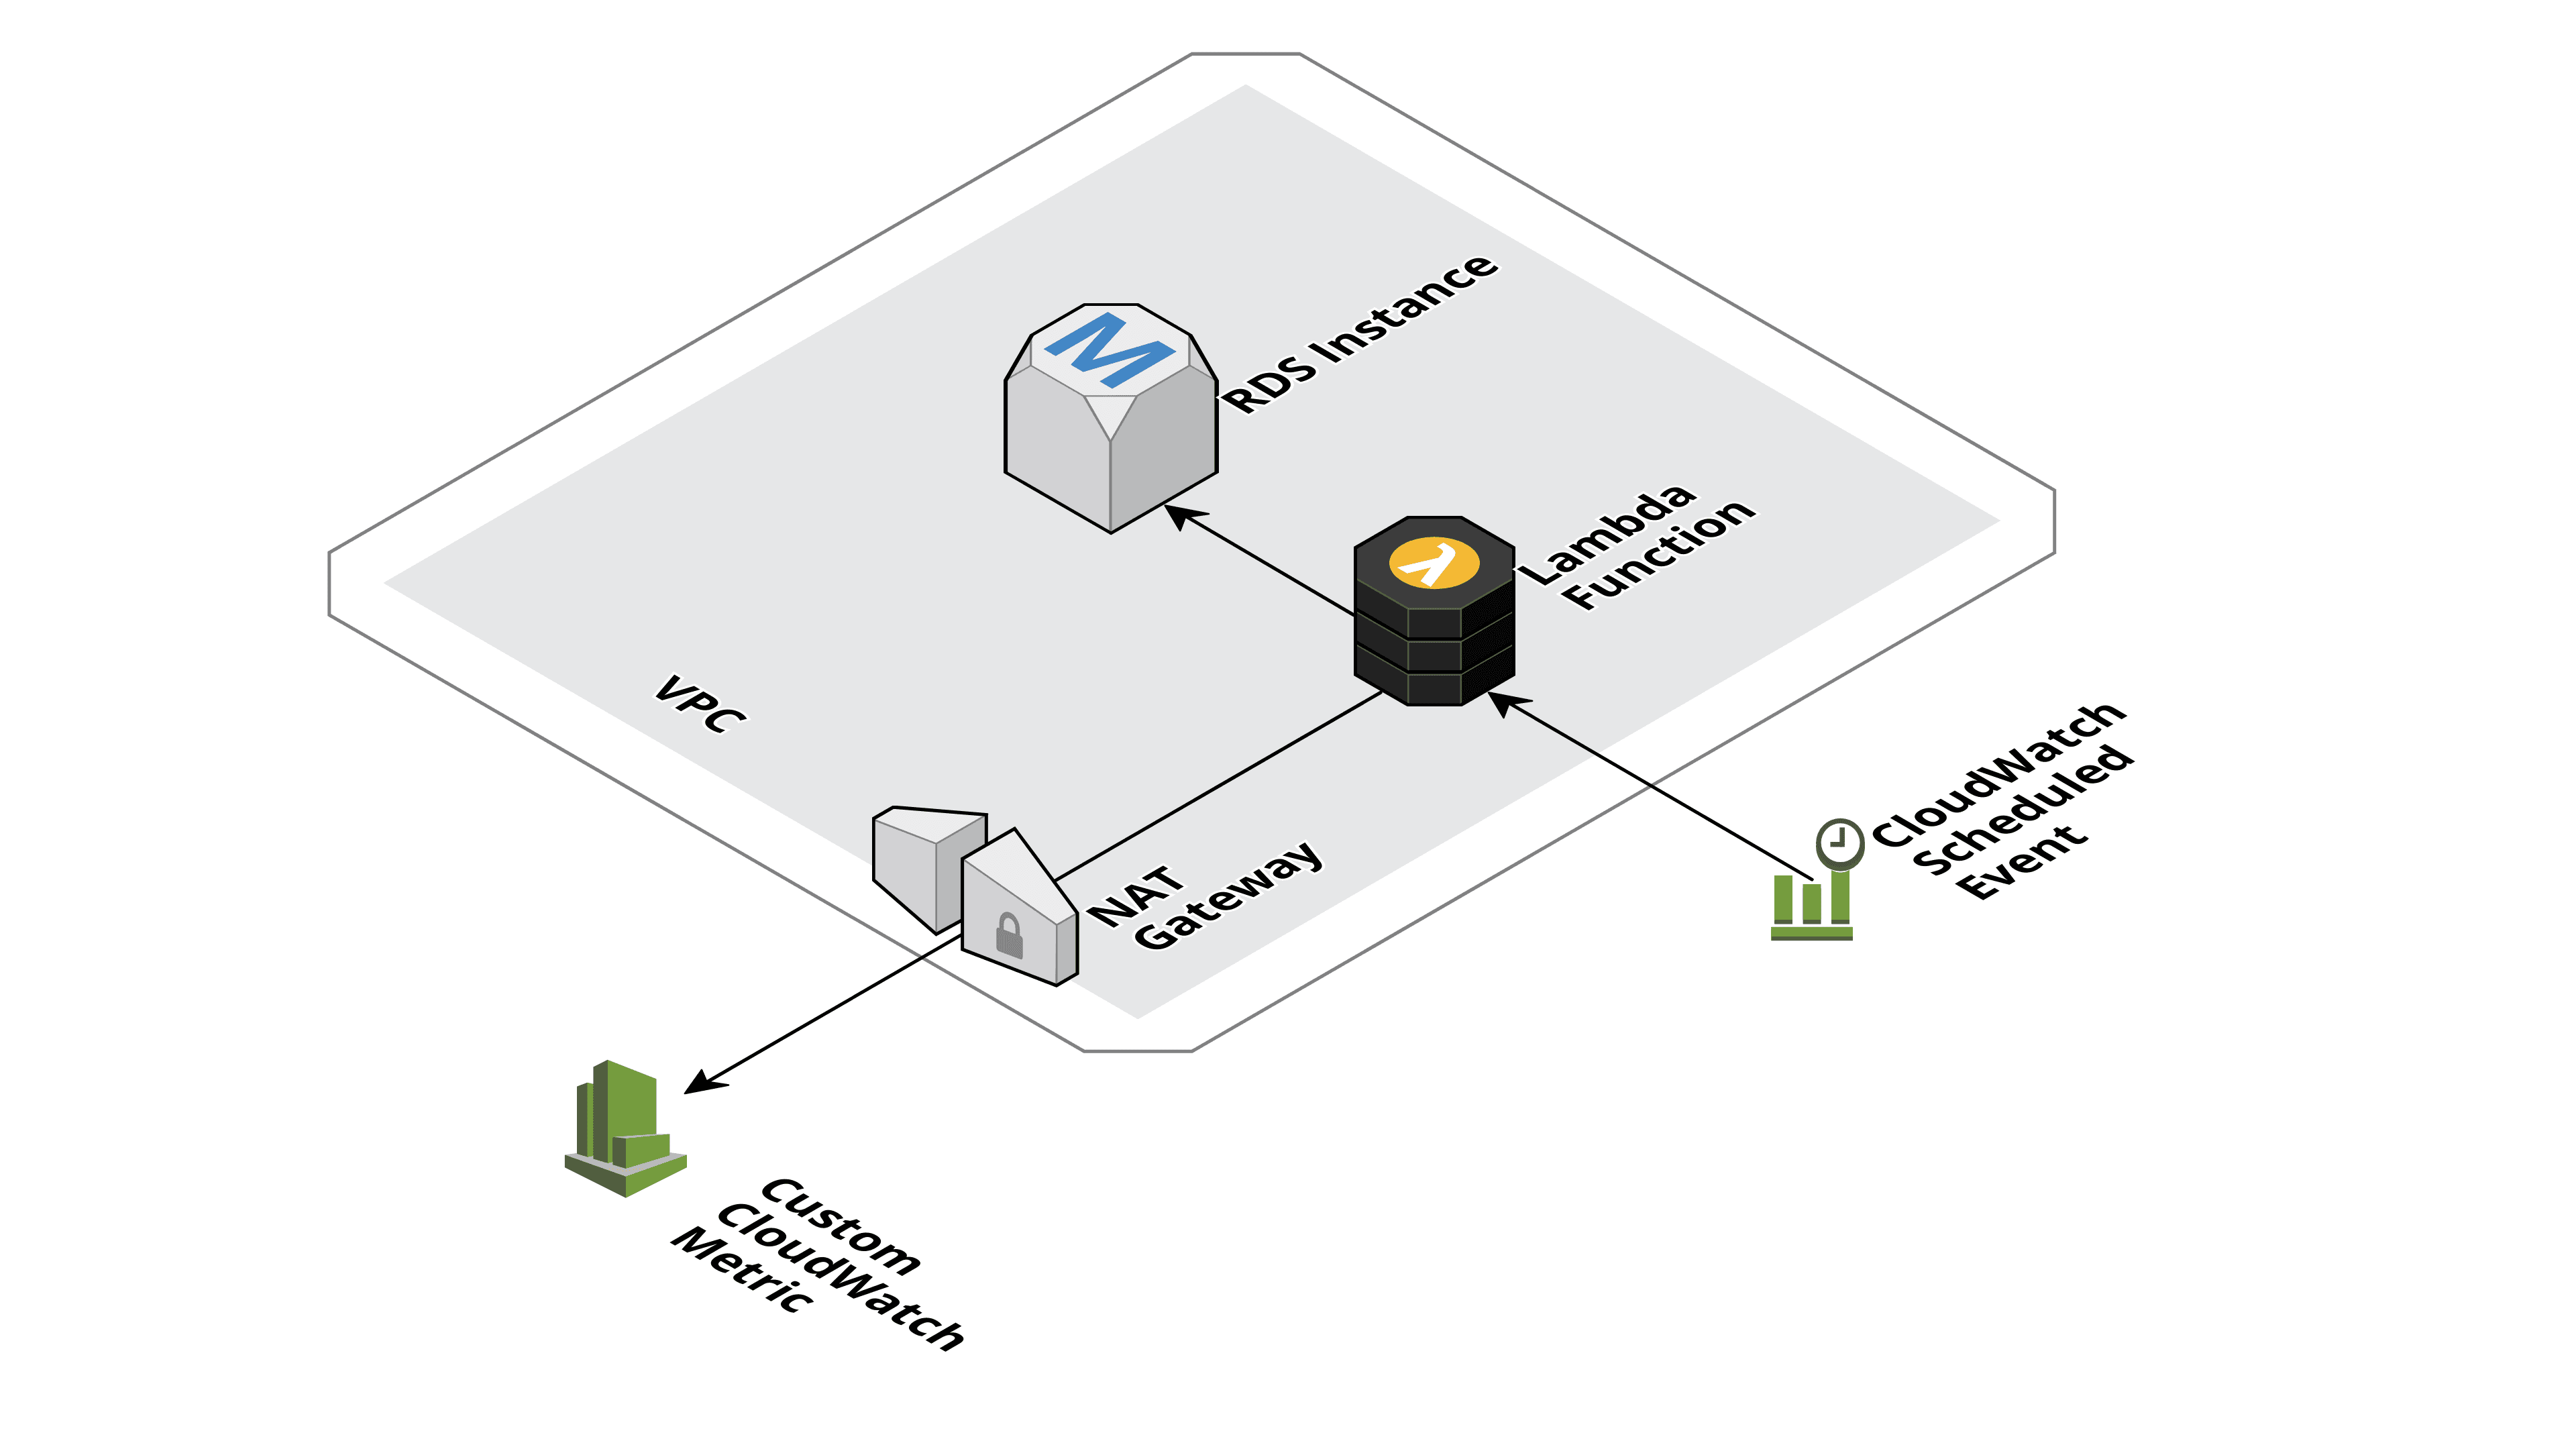 Serverless pattern: accessing public and private resources